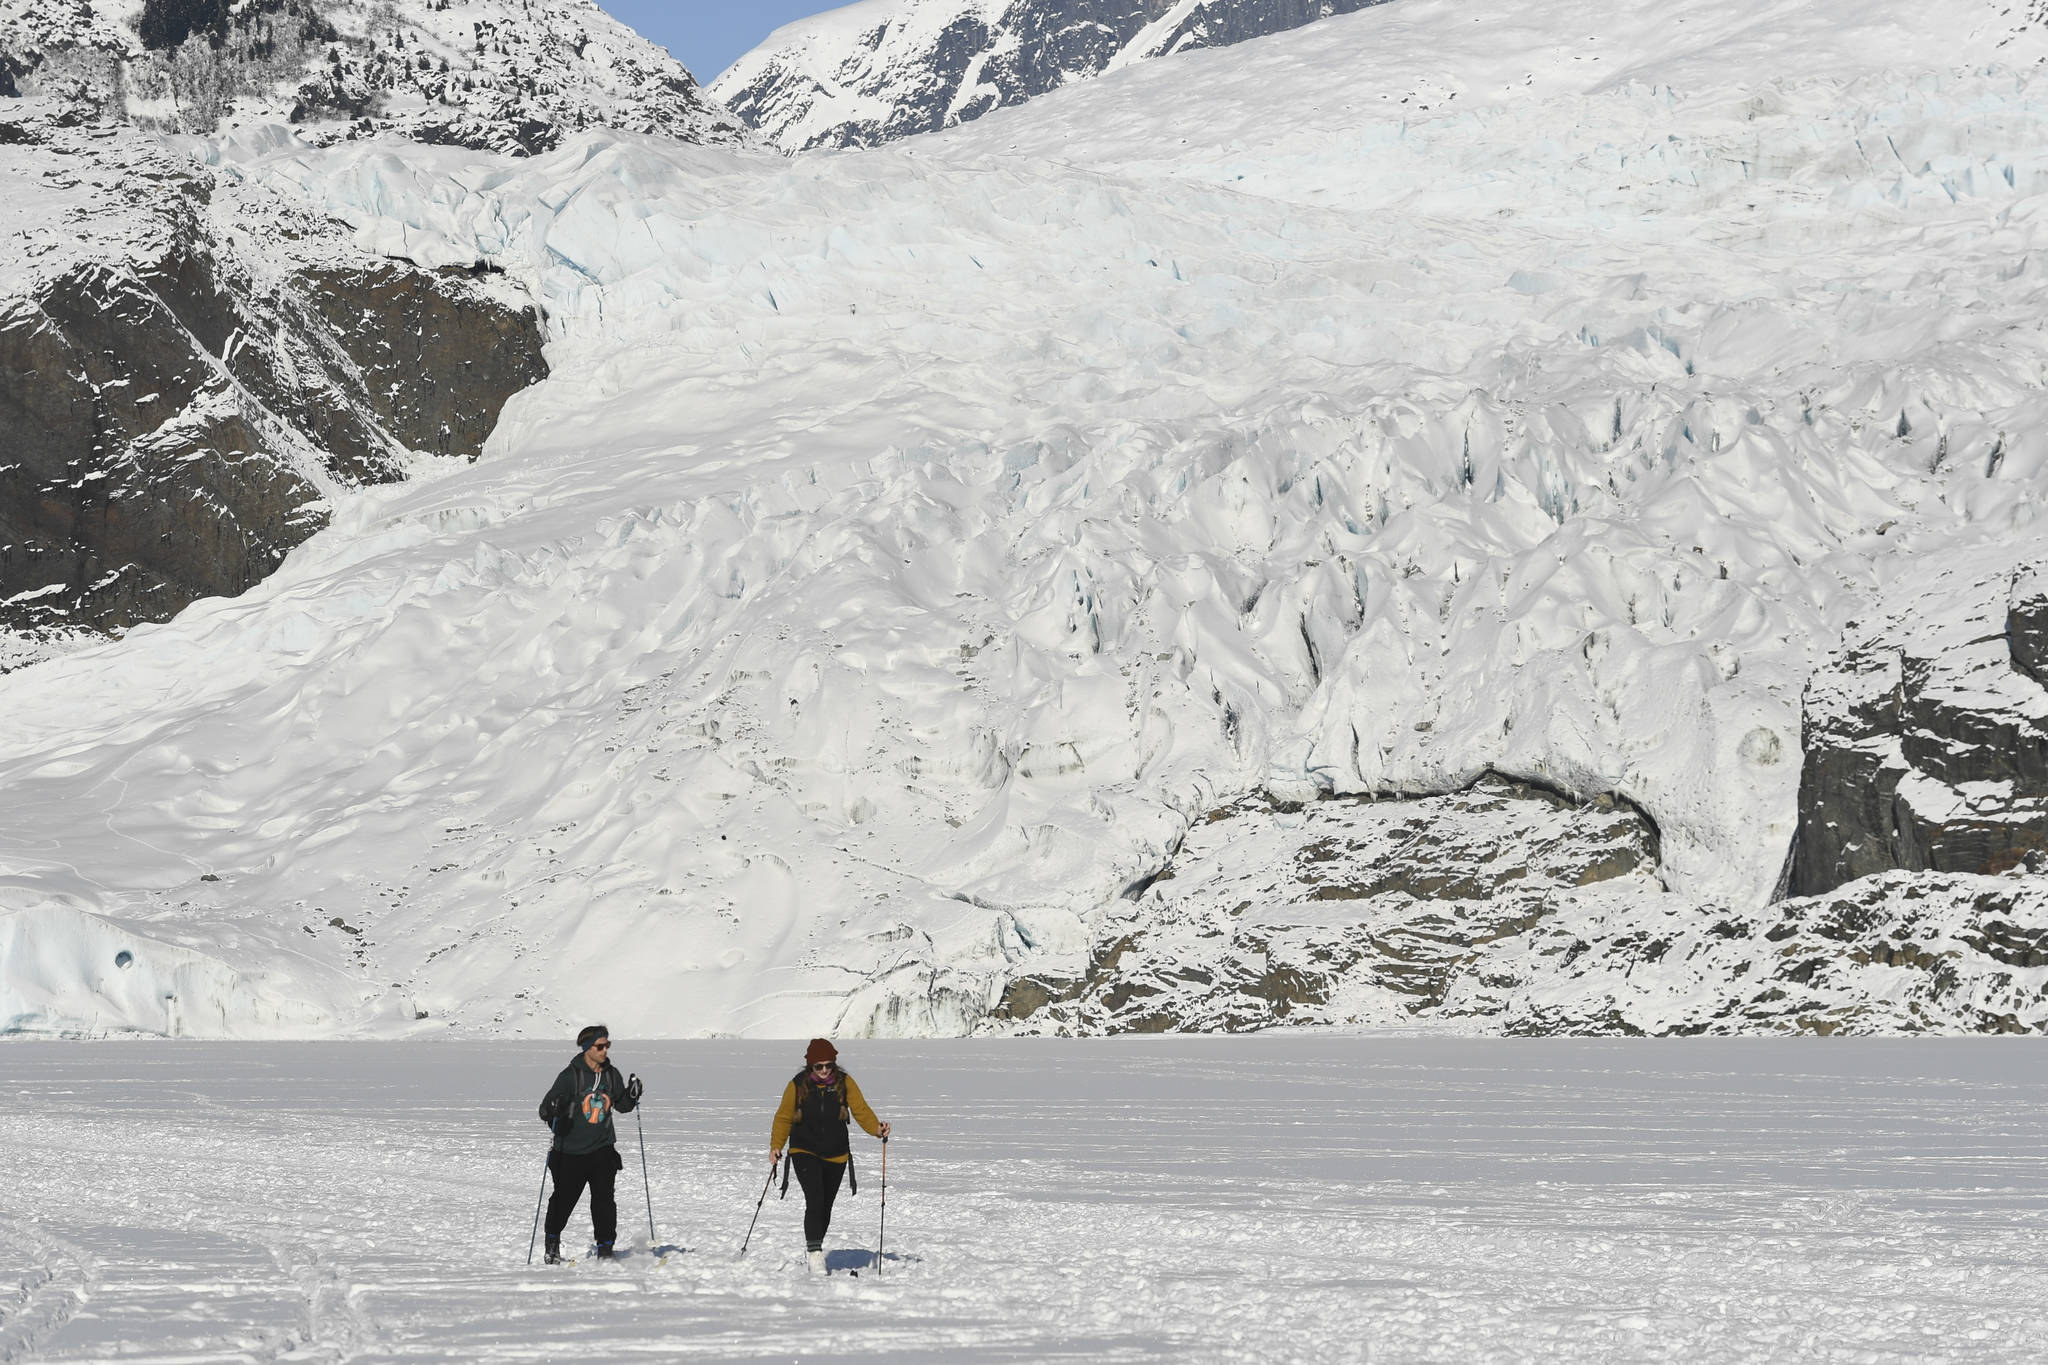 Sam Post, left, and Lydia Steele ski back from a visit to the Mendenhall Glacier on Monday, Feb. 11, 2019. (Michael Penn | Juneau Empire)